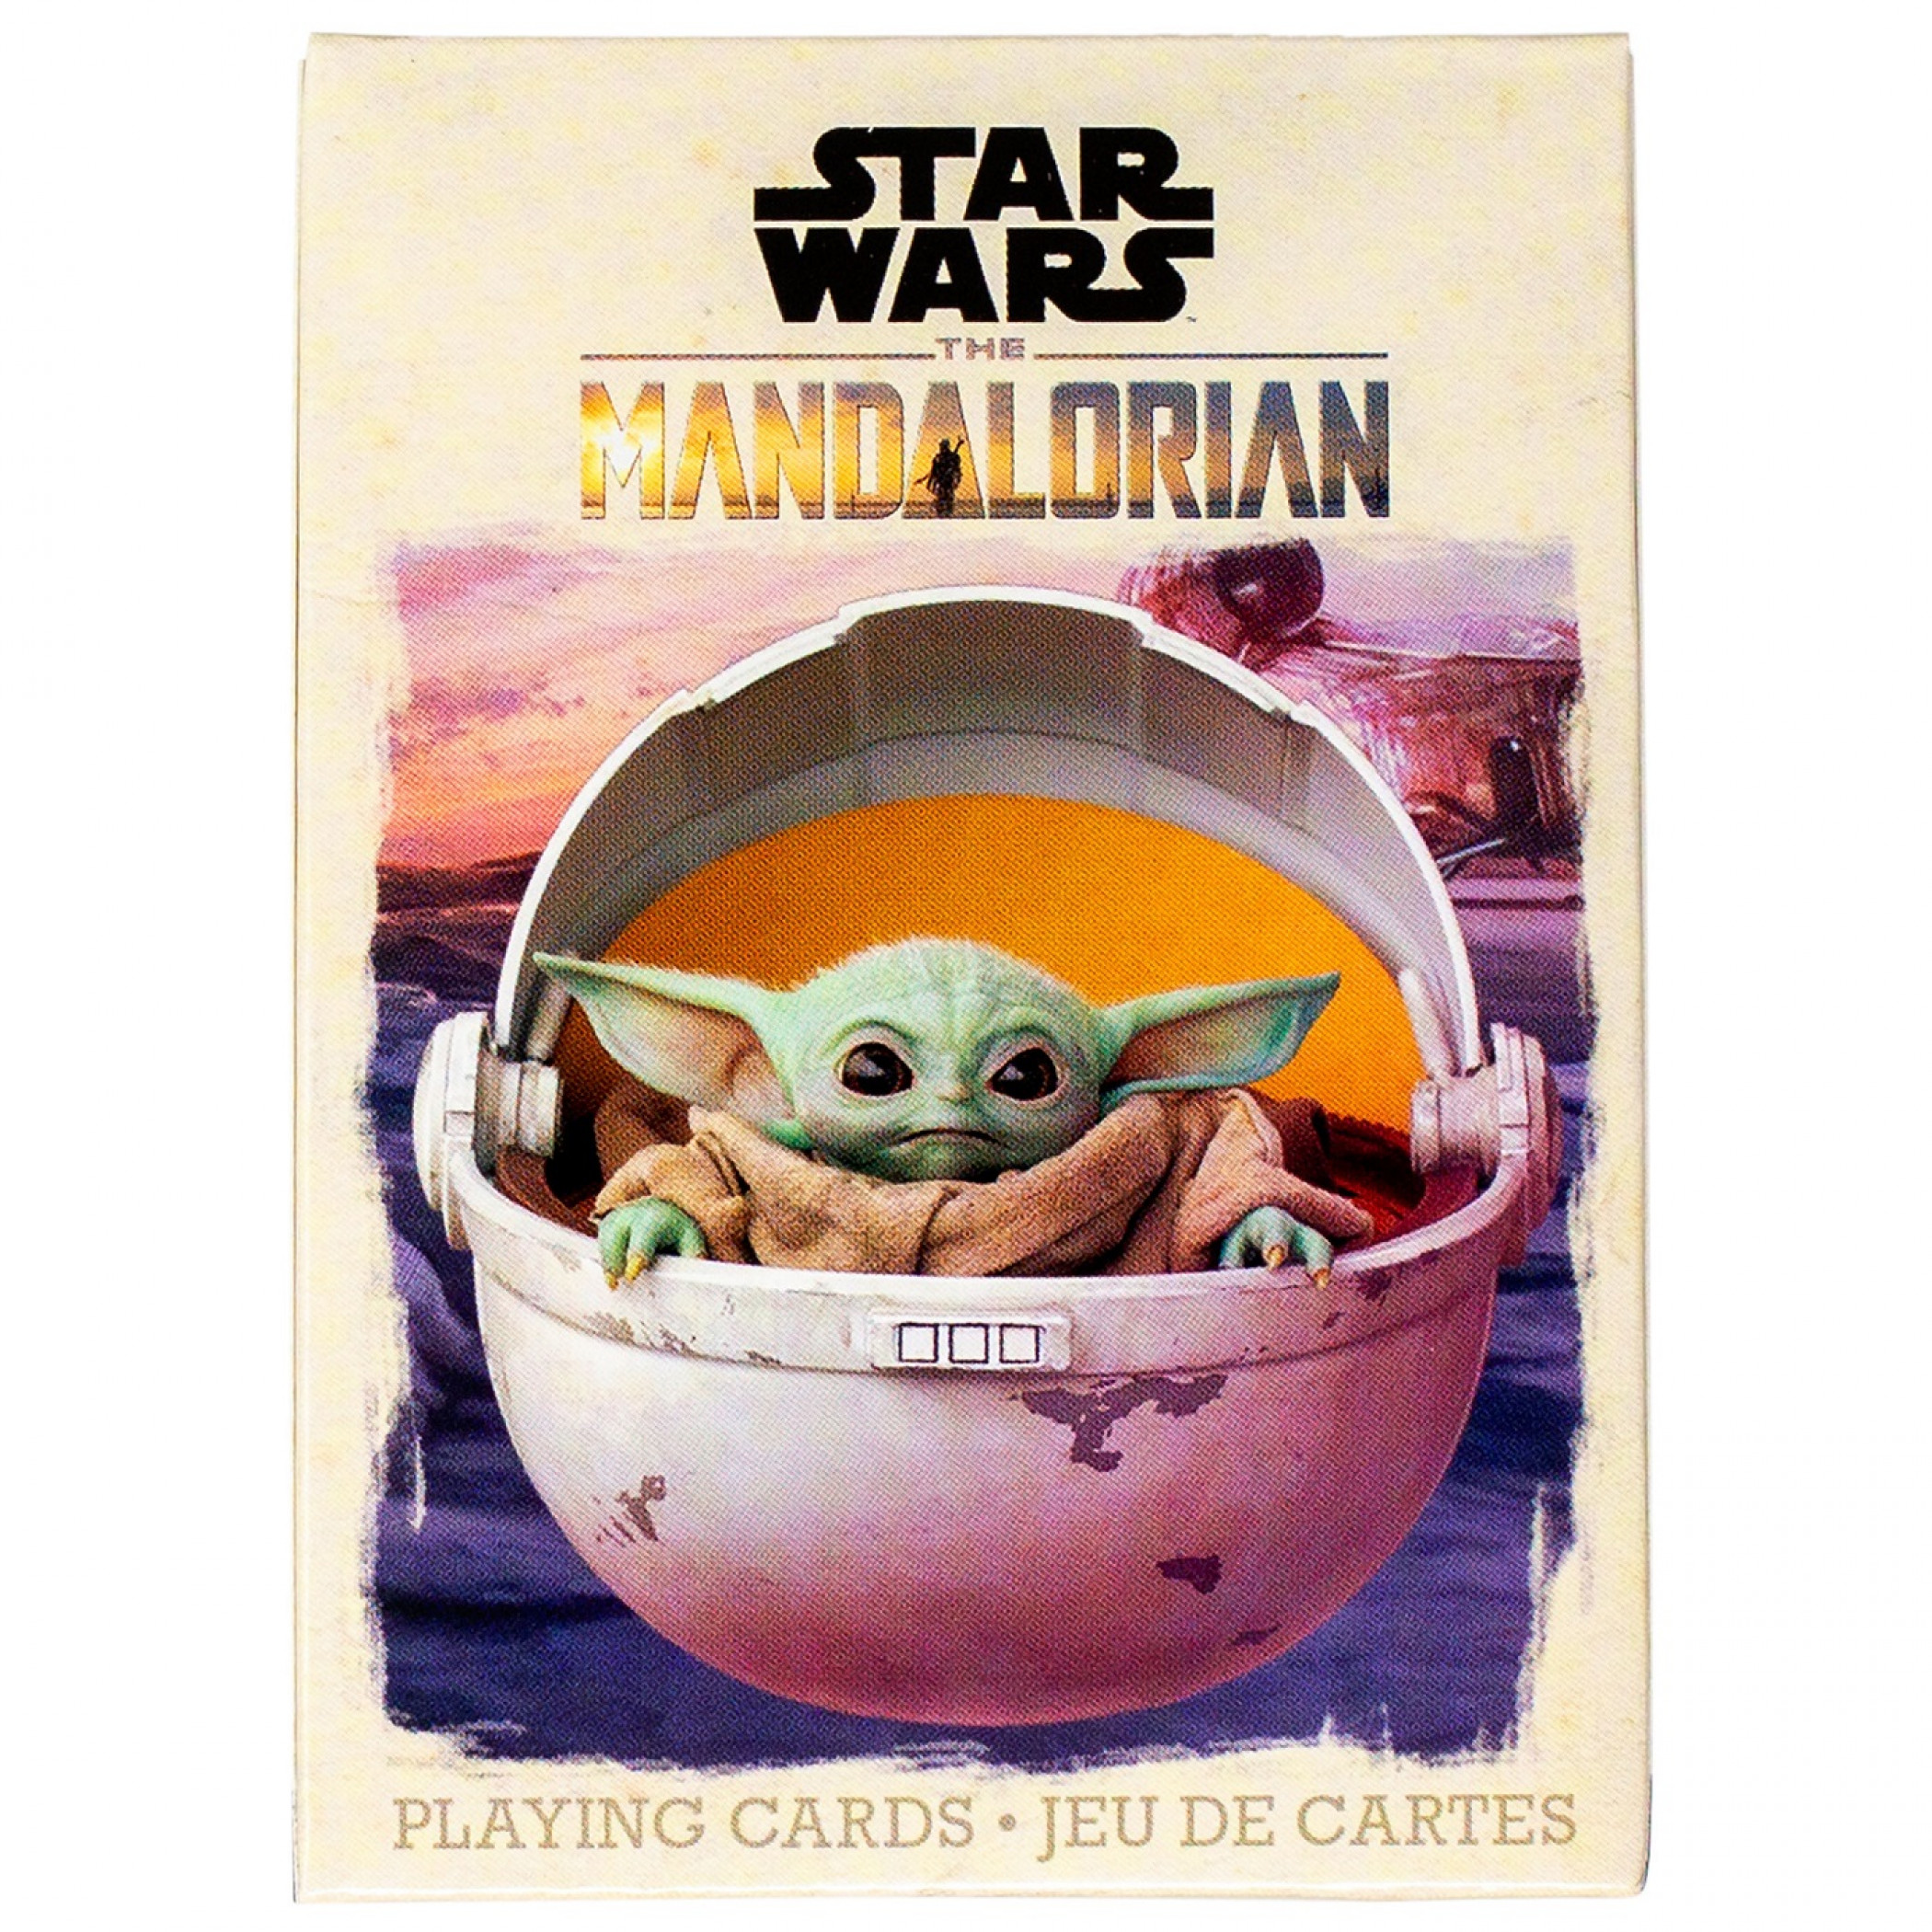 Star Wars The Mandalorian the Child Themed Playing Cards